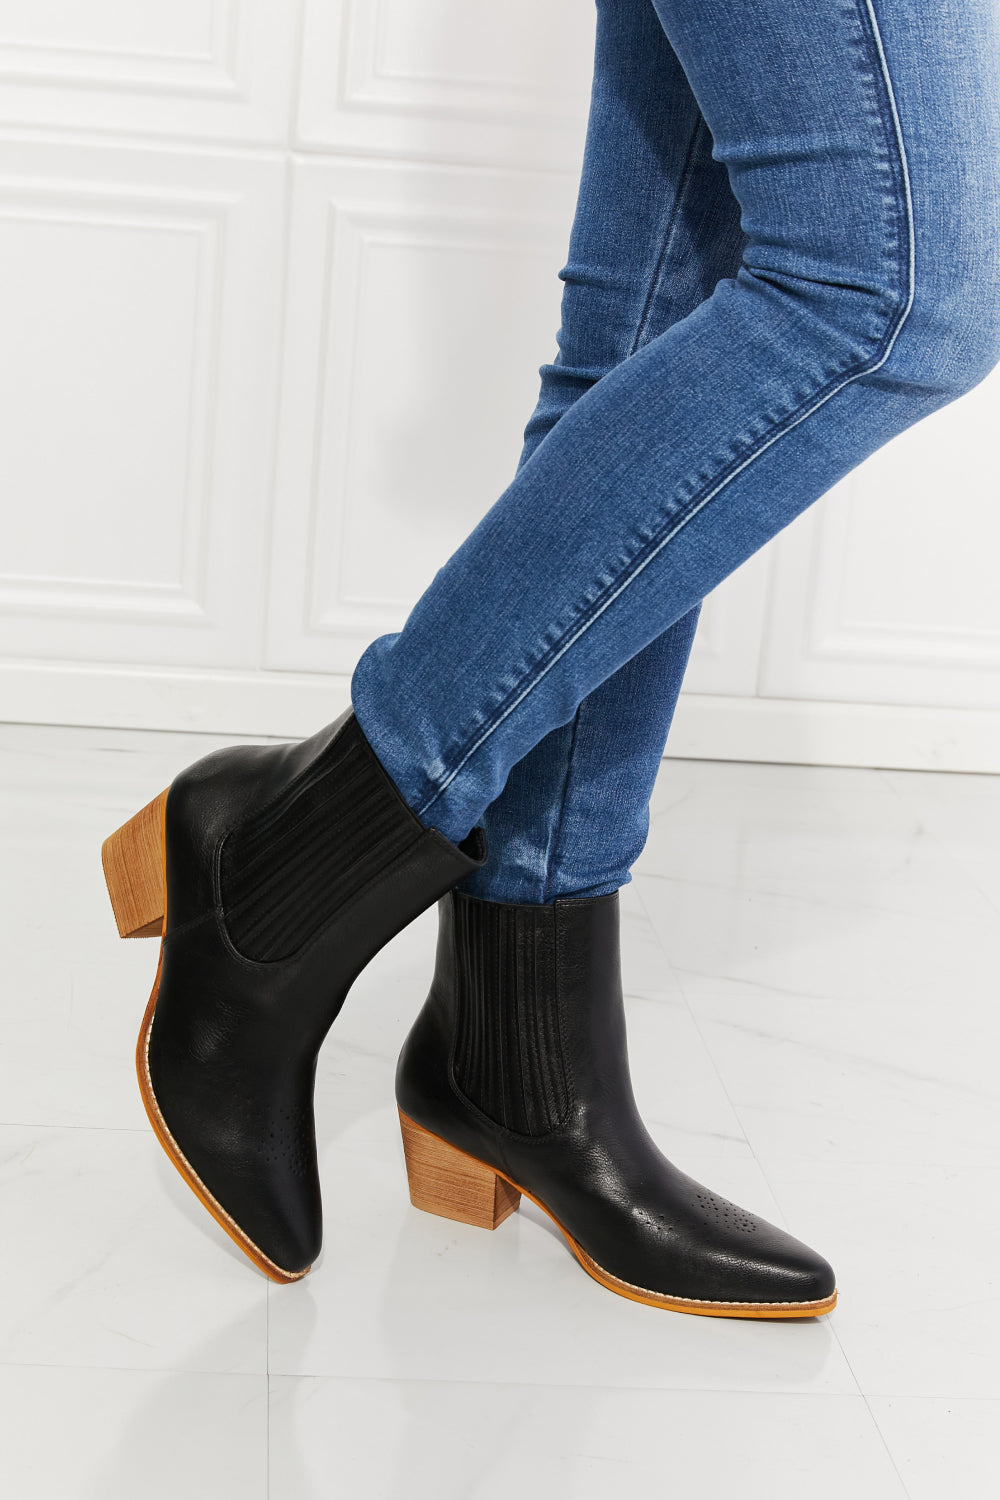 MMShoes Love the Journey Stacked Heel Chelsea Boot in Black MMShoes